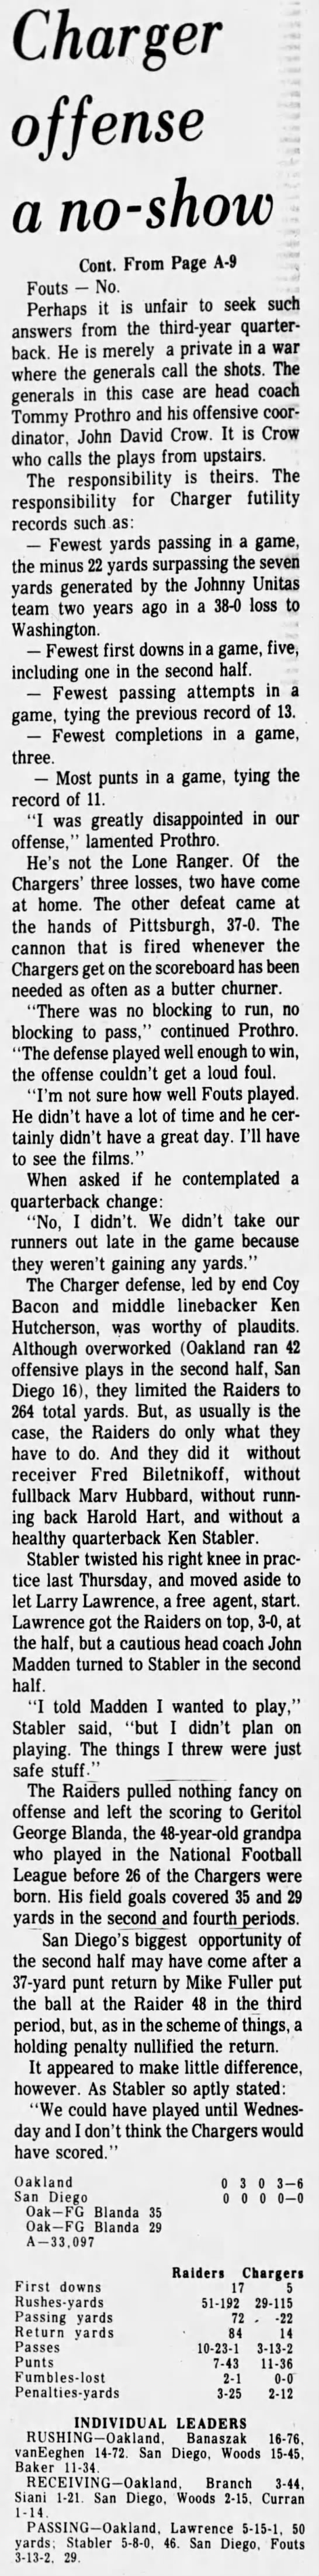 Chargers 0-6 Raiders, 6 Oct 1975 - 